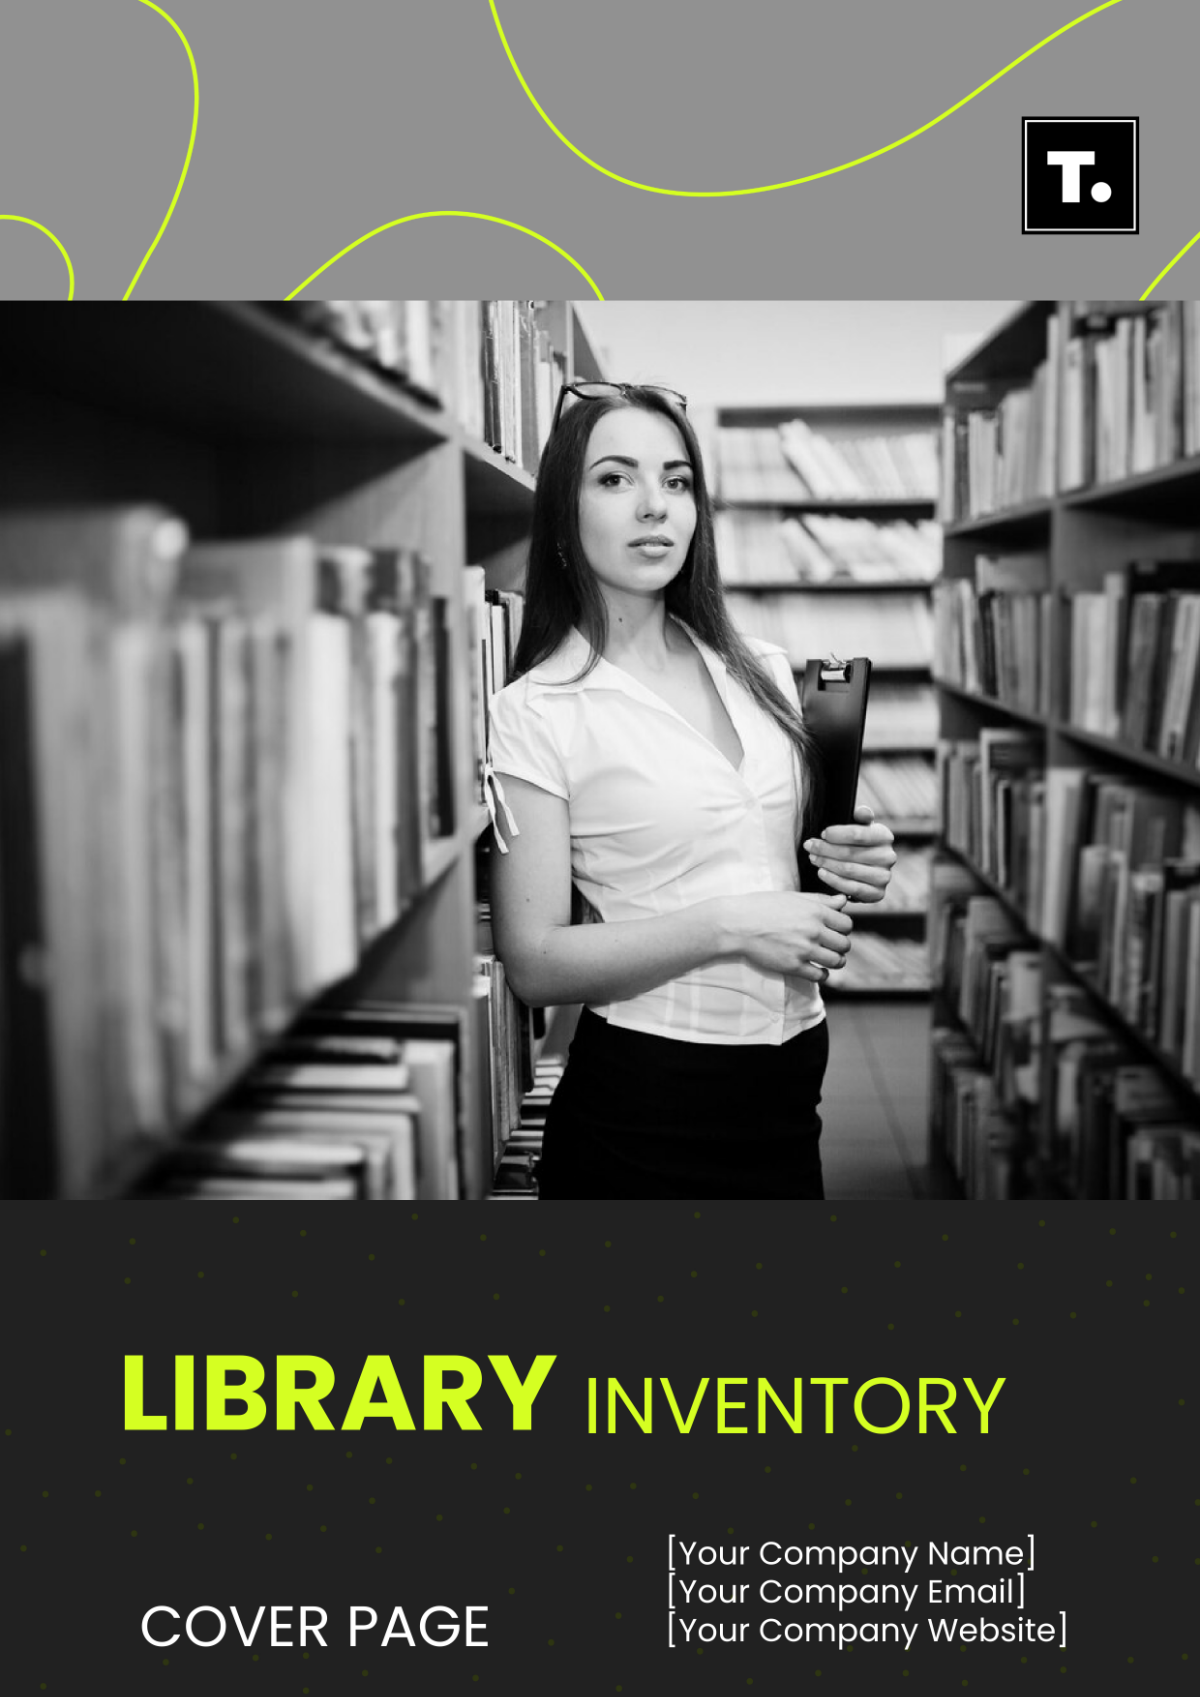 Library Inventory Cover Page